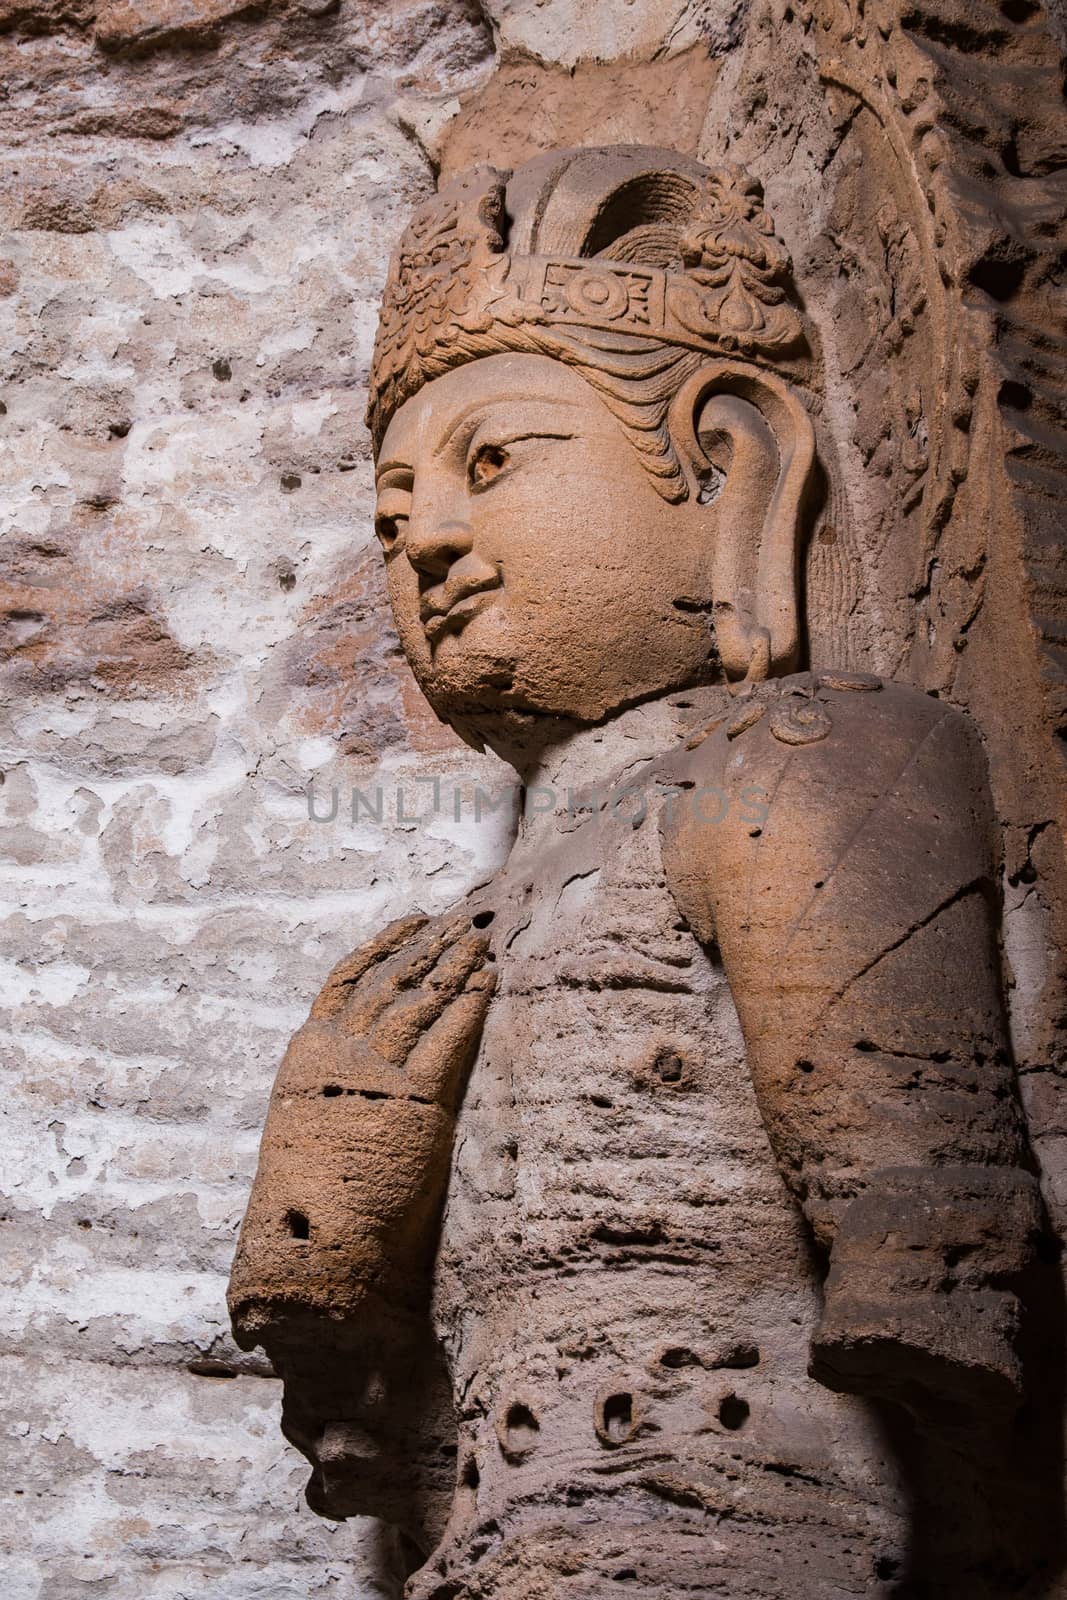 Giant reddish brown stone Buddha scultpure in one of the main caves at the Yungang Grottos.